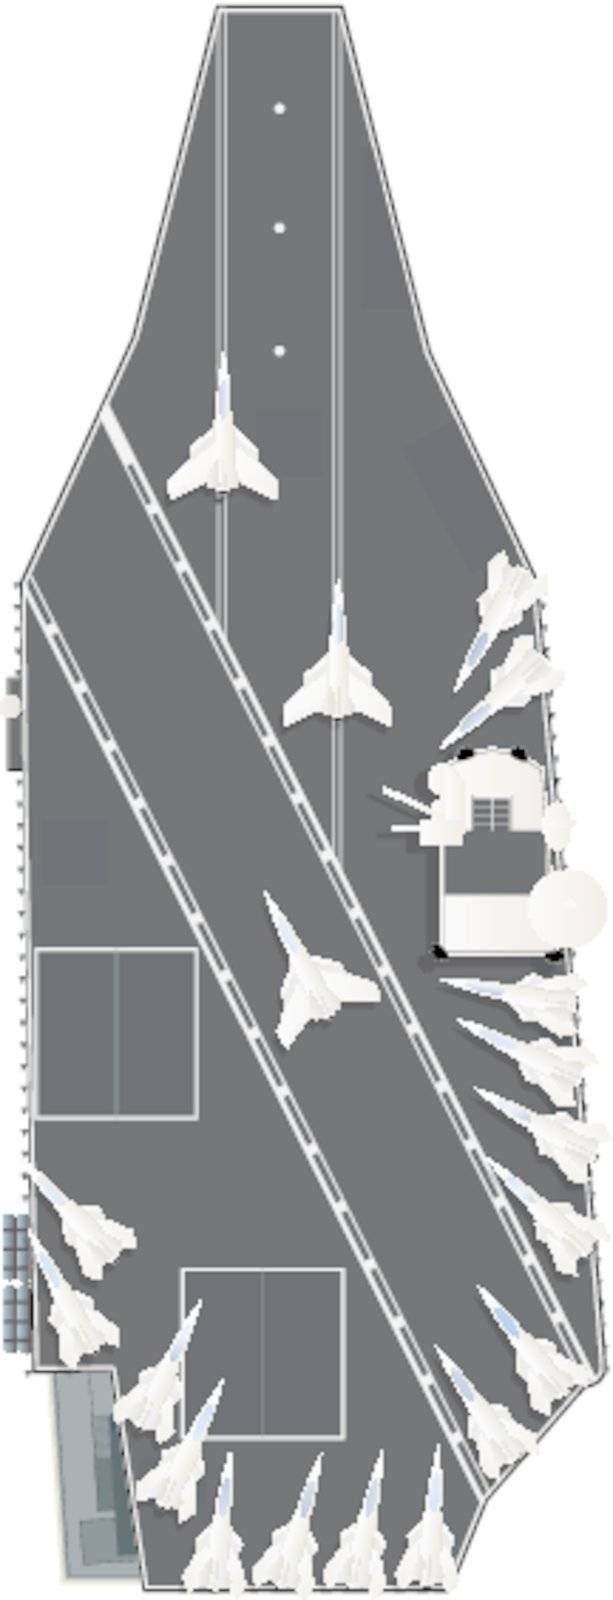 Drawing of a aircraft carrier with fighter planes on deck.